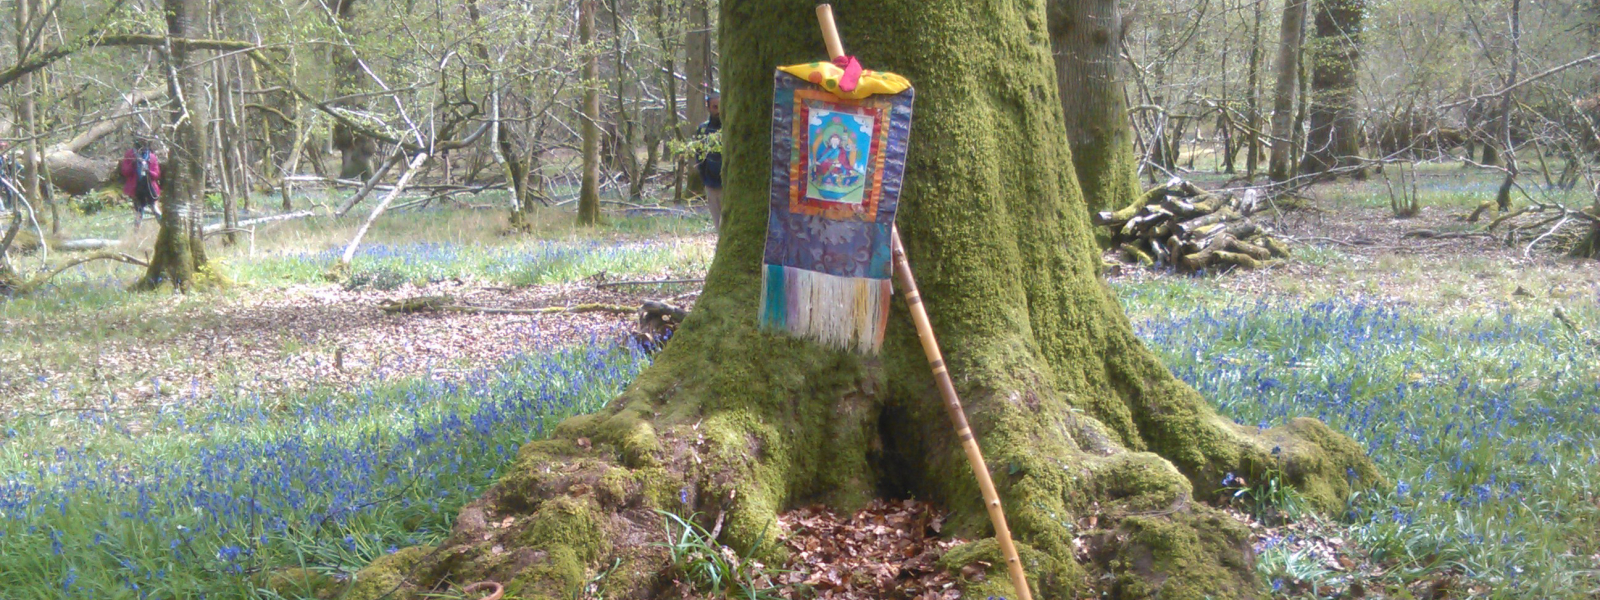 Yatra flag leaning against a tree in a wood filled with bluebells